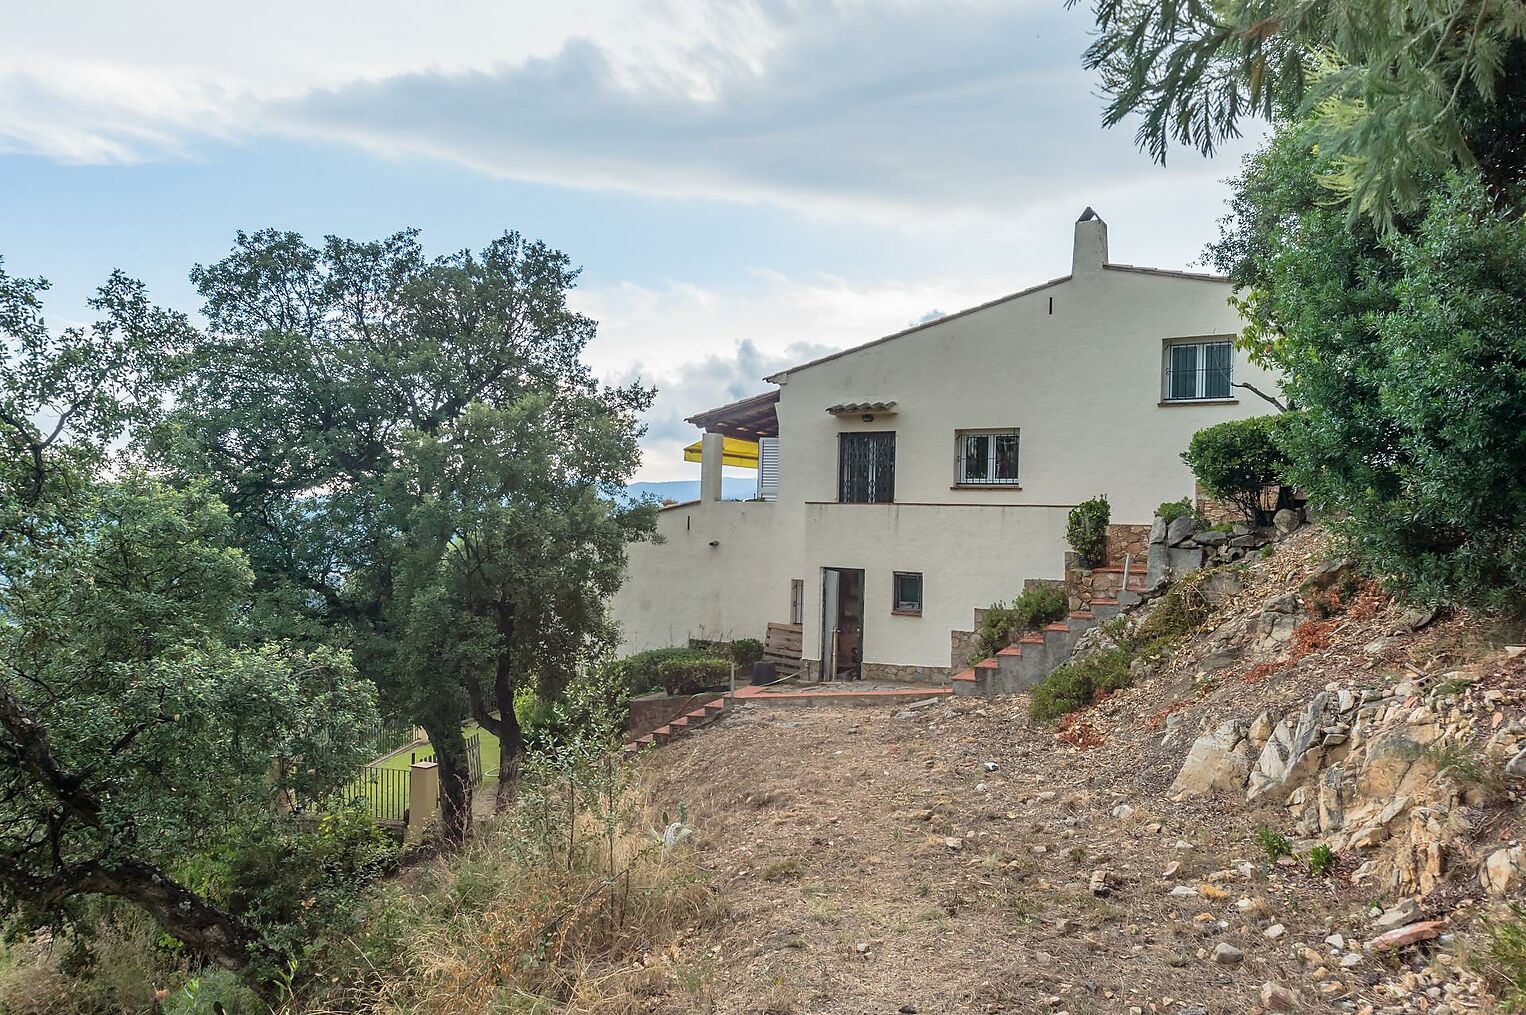 Detached villa on a large spacious plot with private pool and superb views.